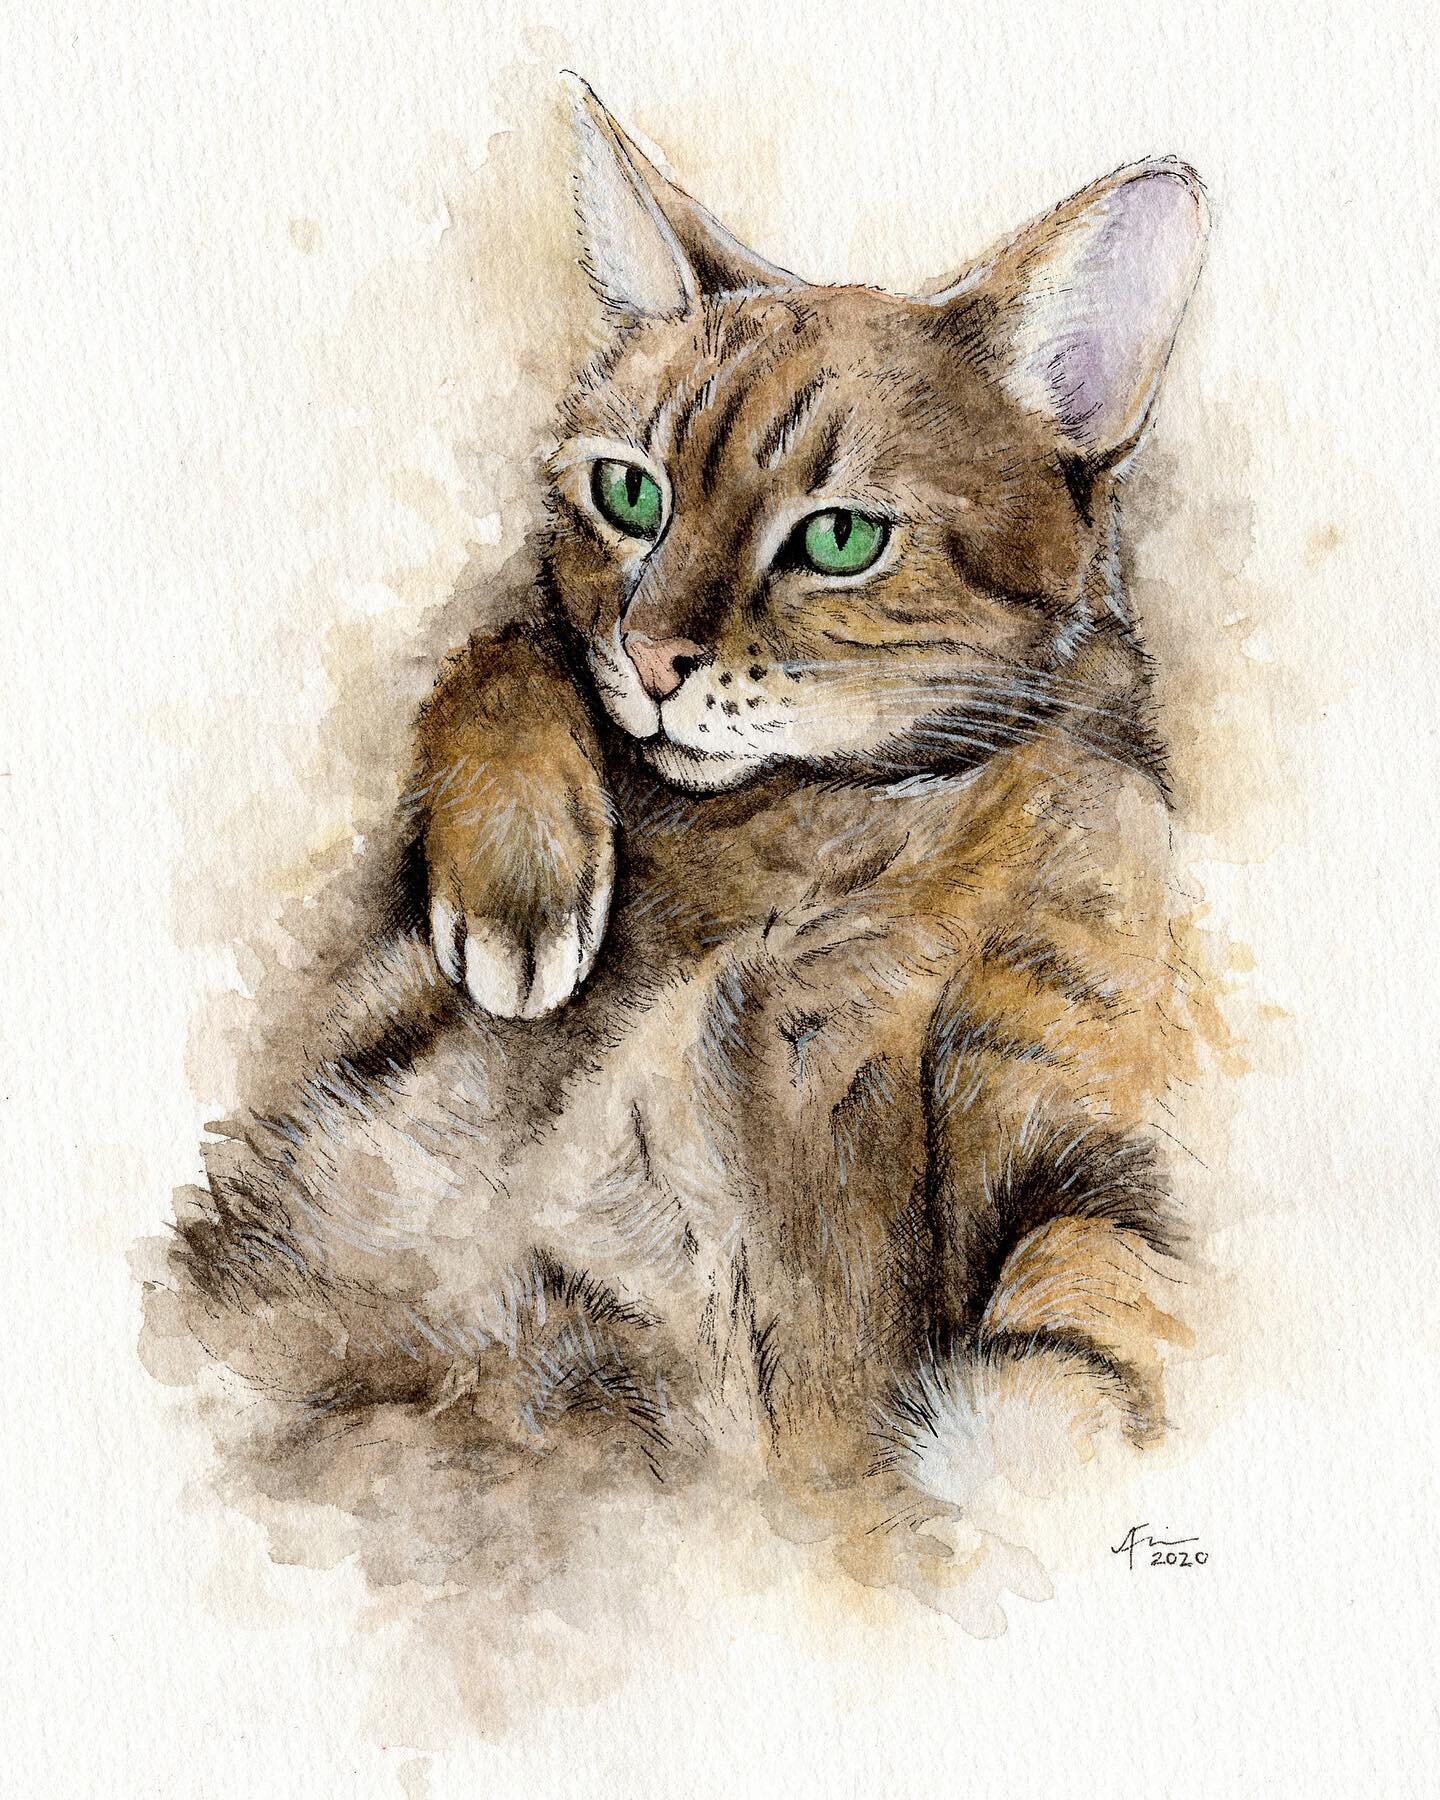 Another #petportrait for friends: Stella, in ink, watercolor, and acrylic.
&bull;
[always taking commissions!]
&bull;
#illustration #drawing #petportraits #cat #cattitude #fluffybelly